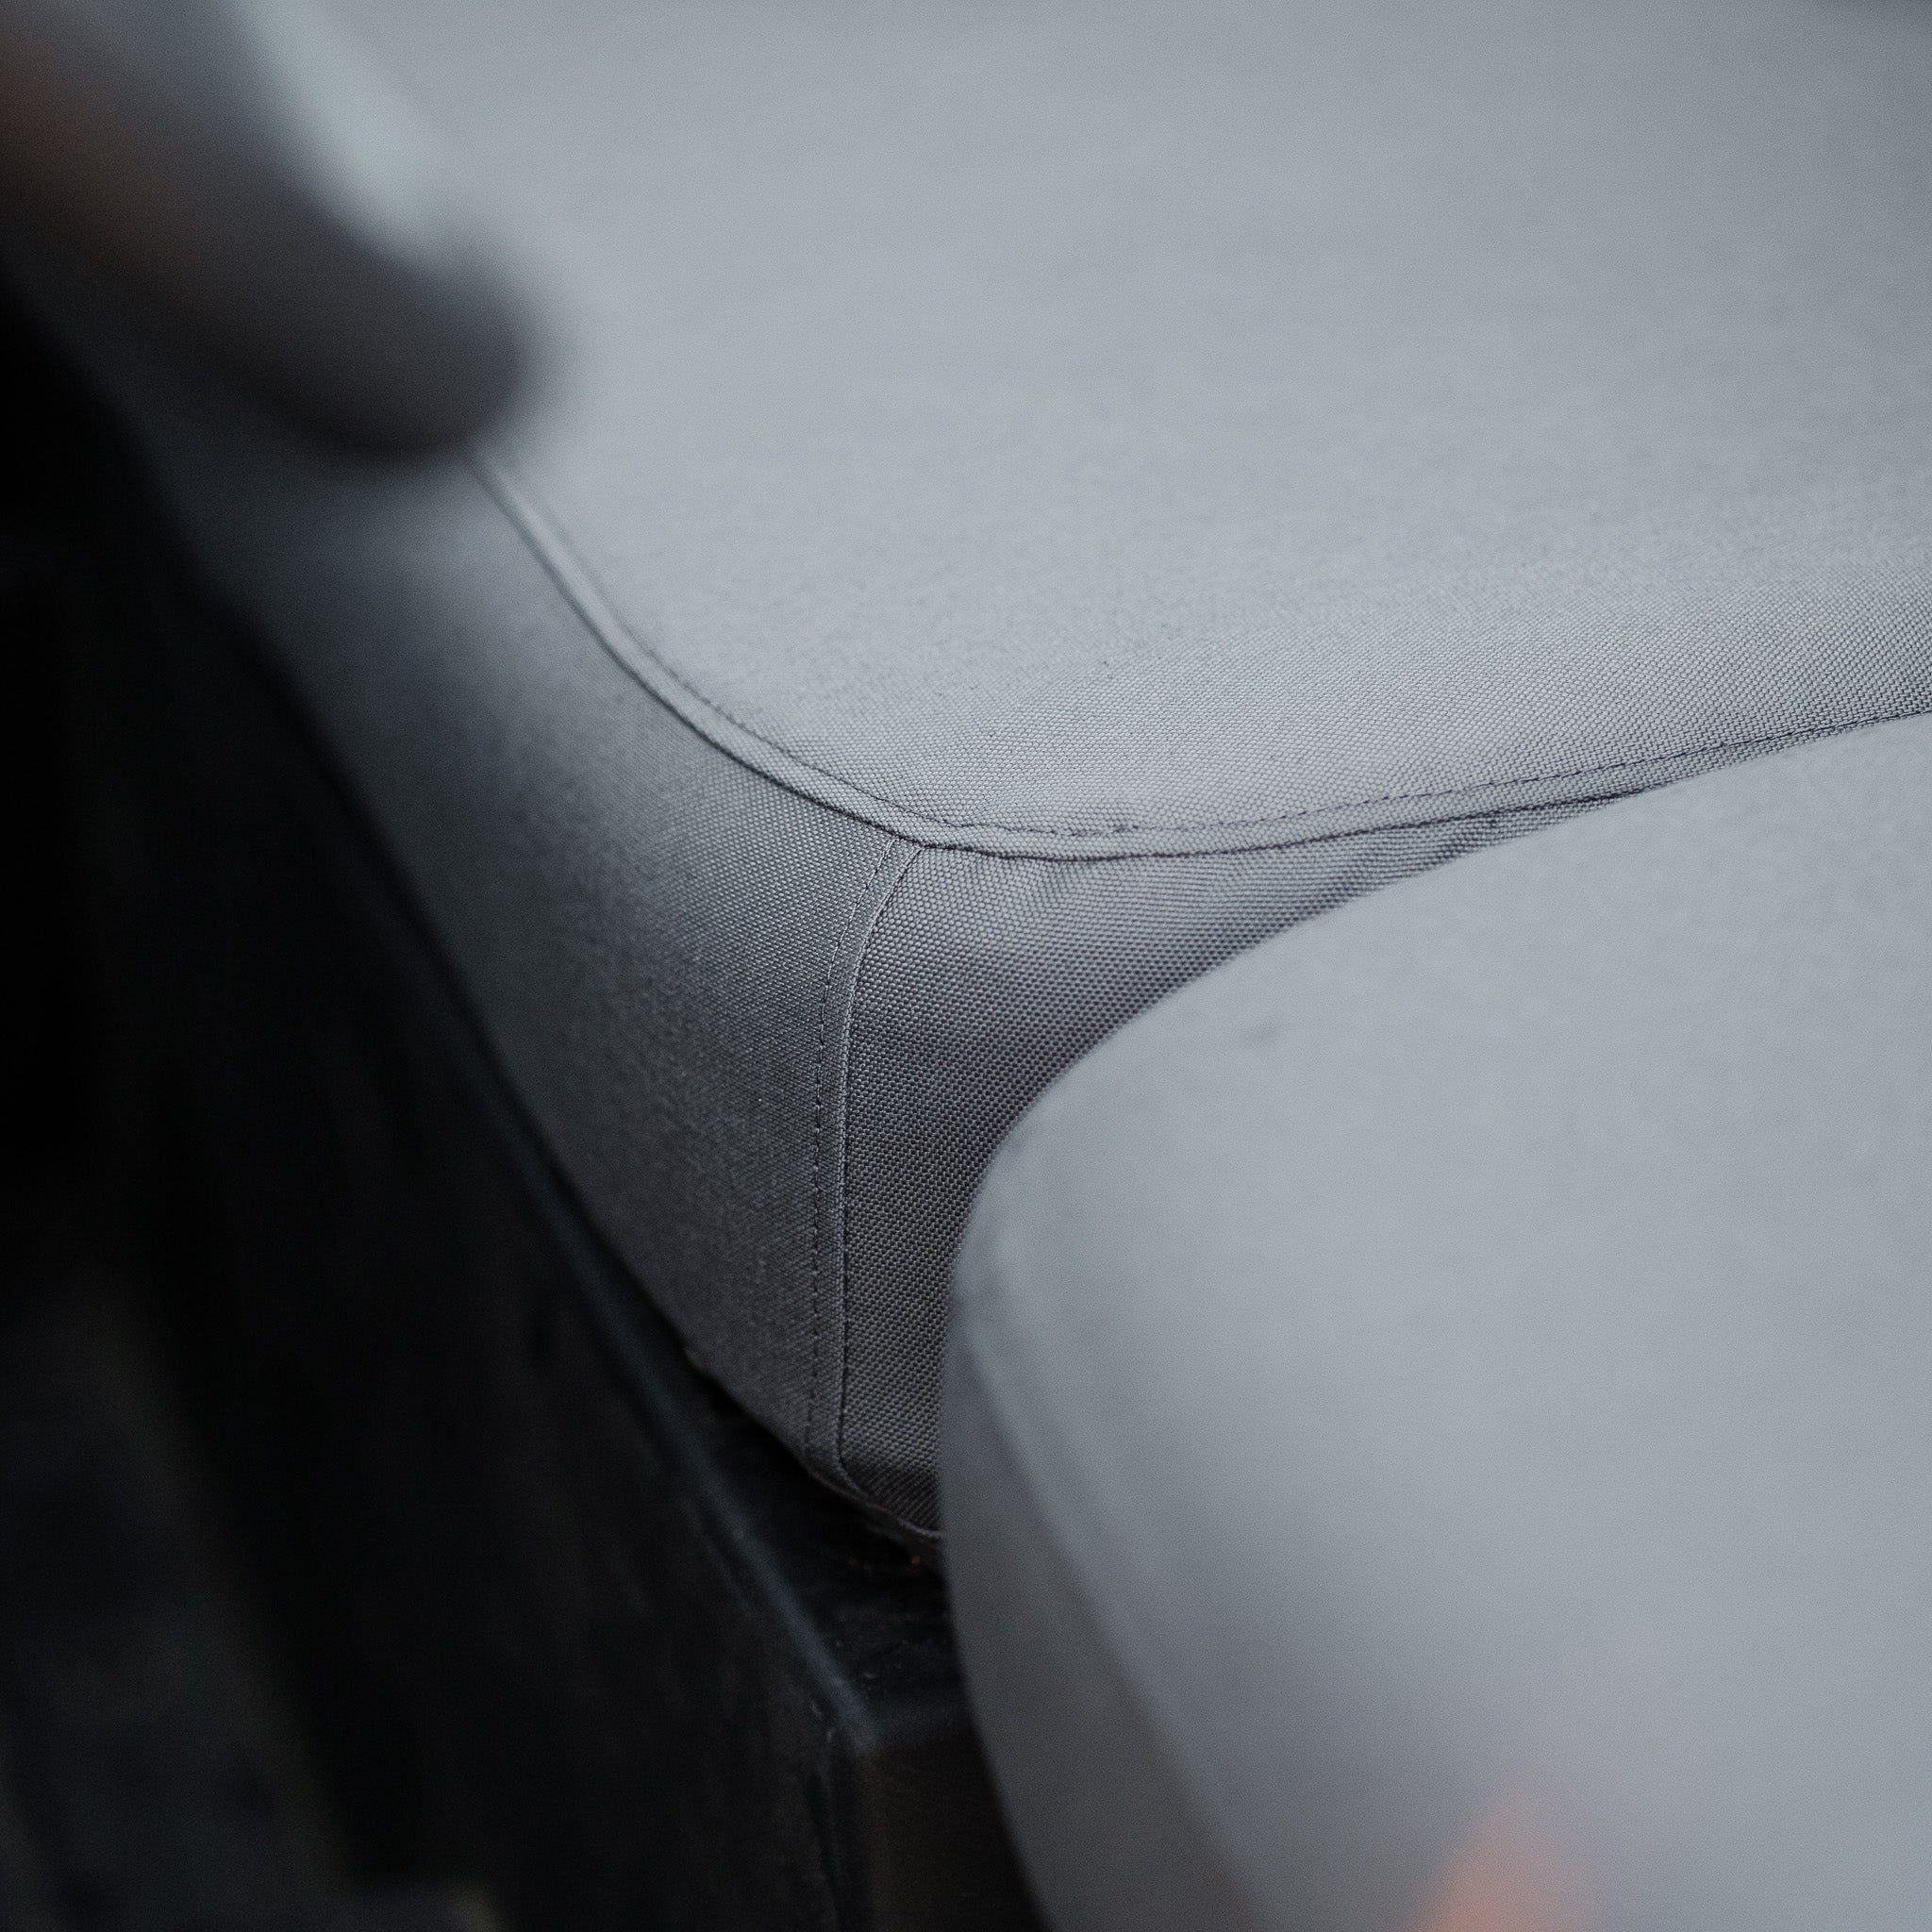 Another detail photo of the seat covers on this John Deere Gator side-by-side. Everything is hand stitched in the USA.